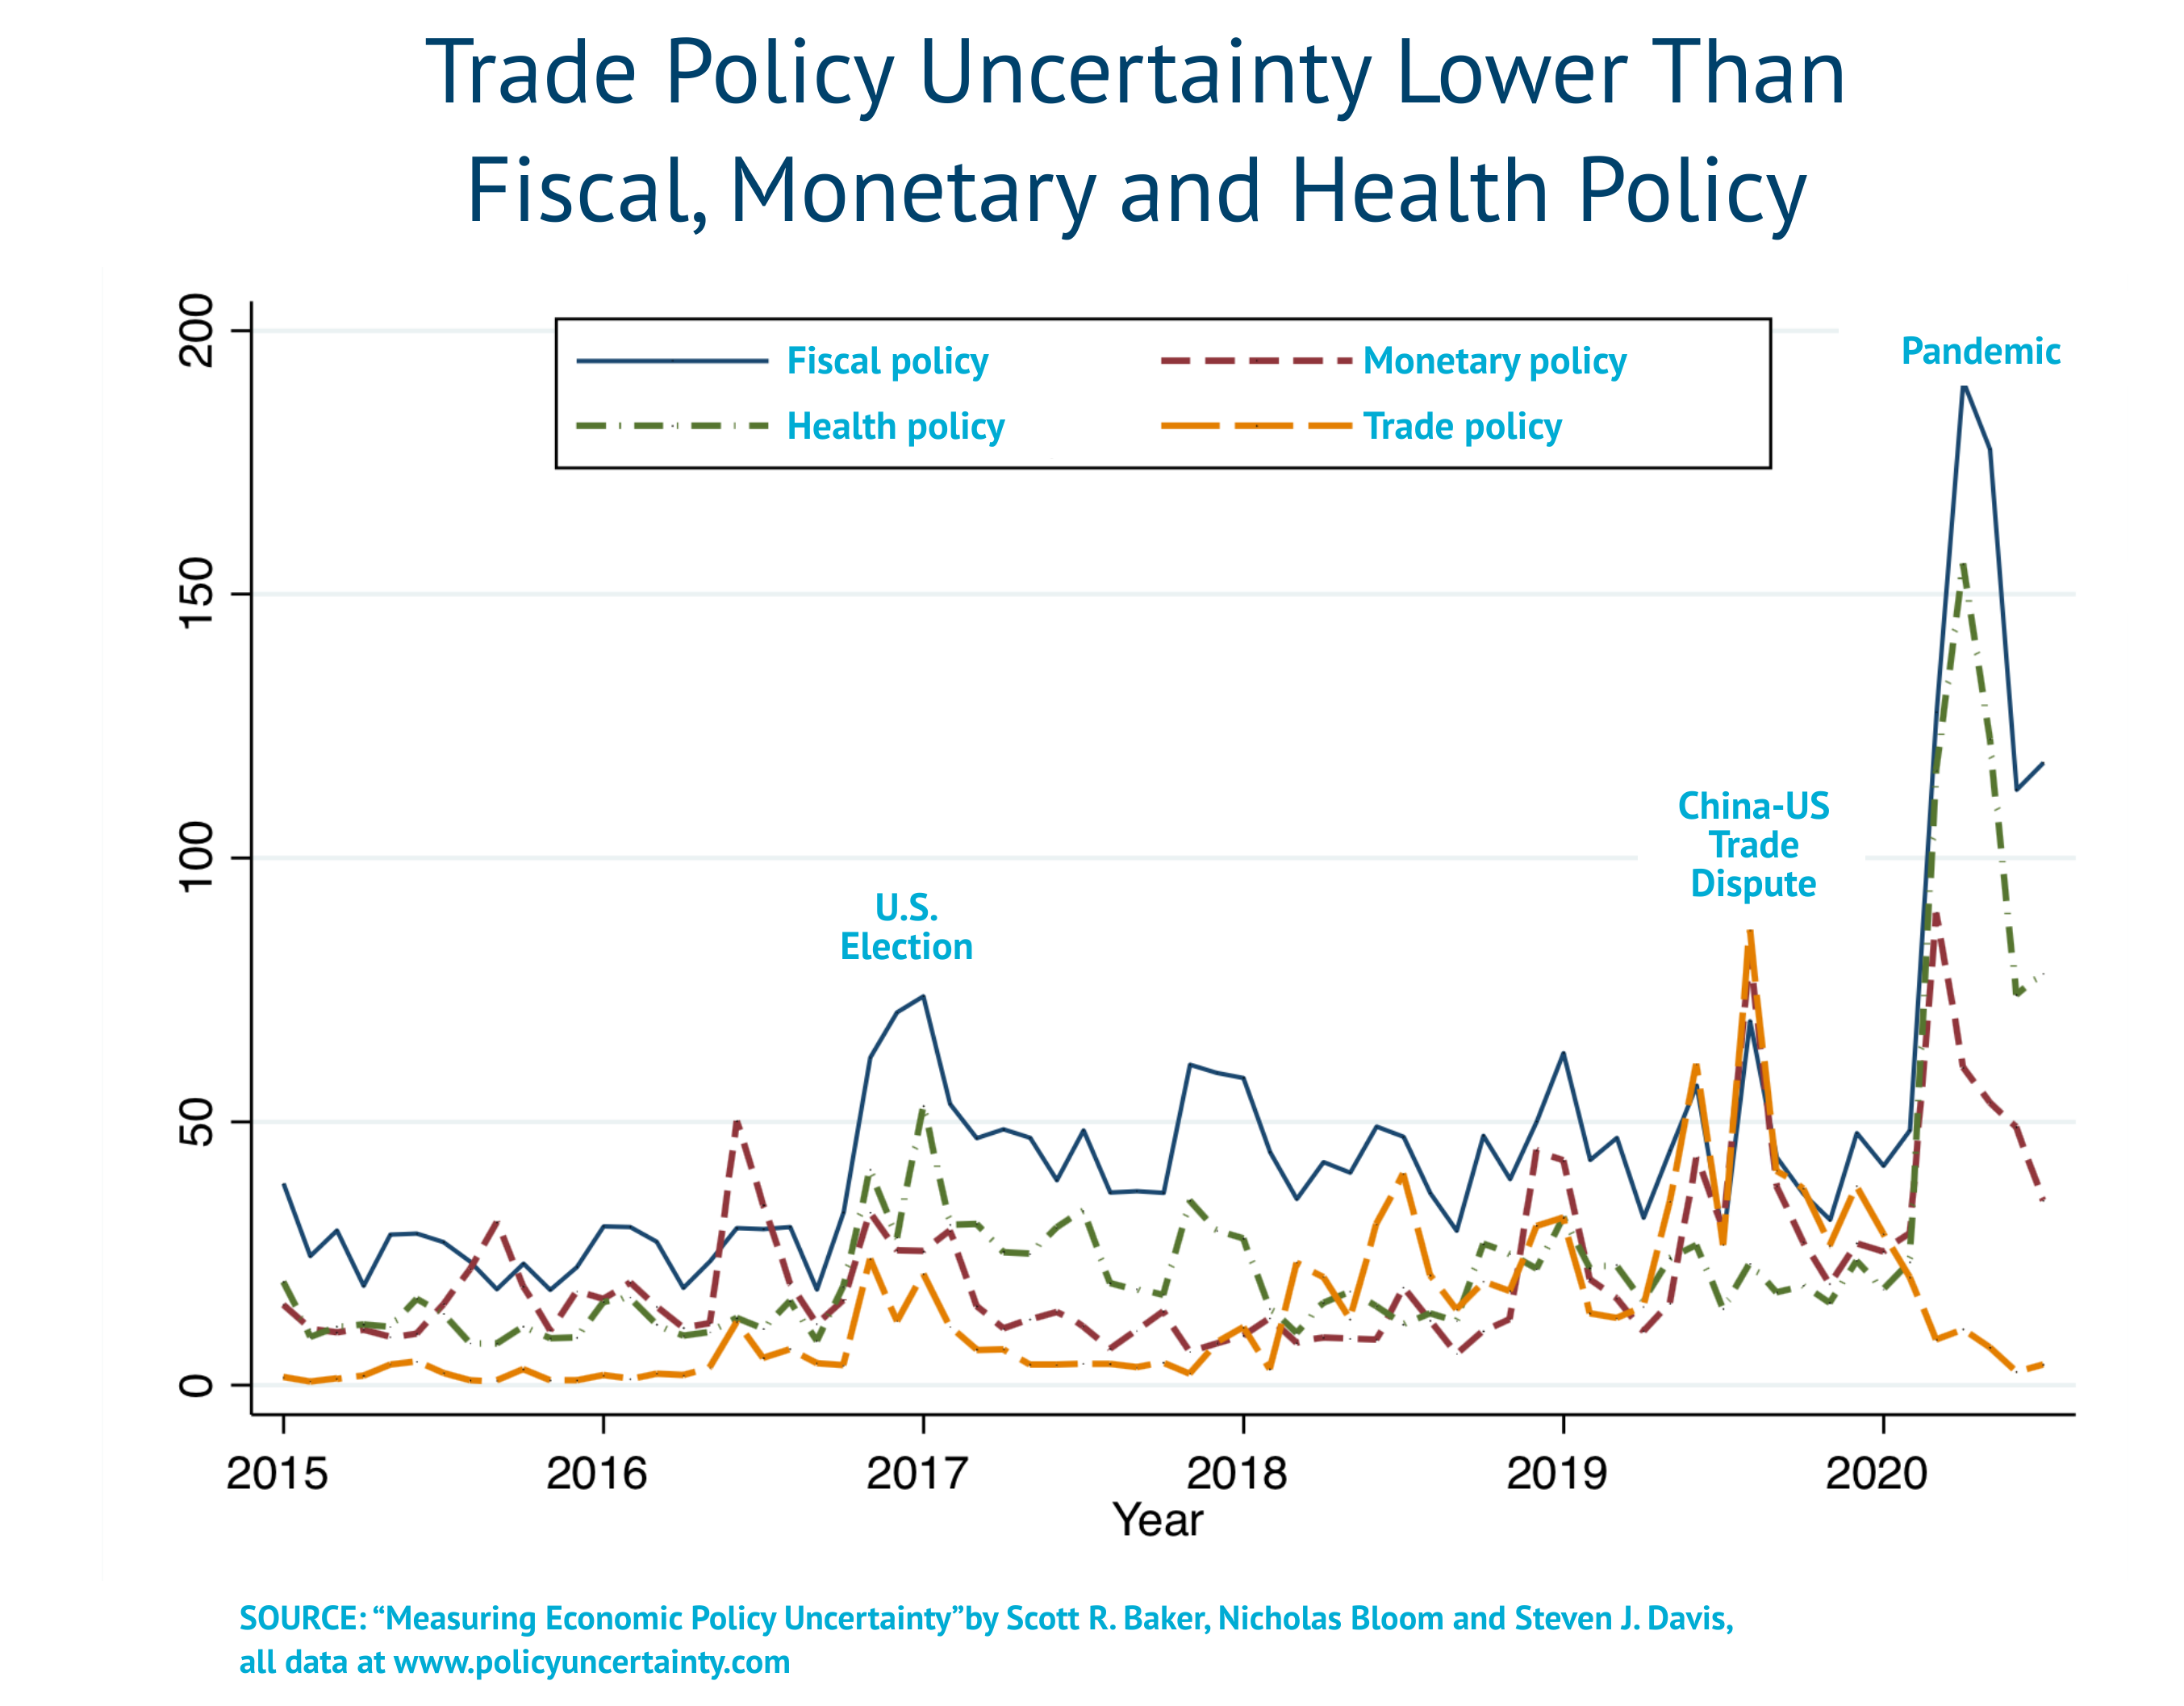 Trade Policy Component of Uncertainty